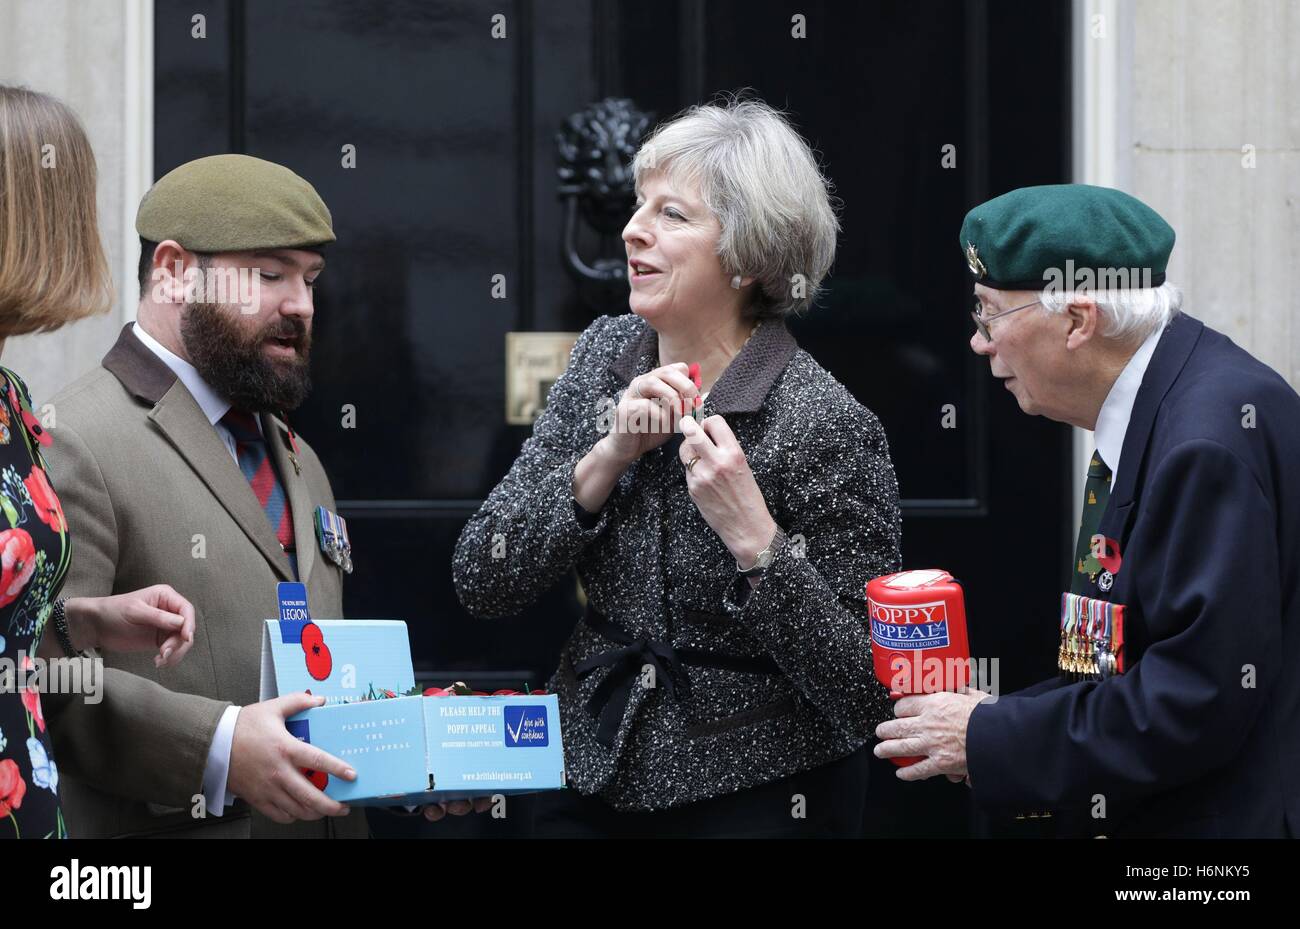 Prime Minister Theresa May meets veterans Stewart Harris (left), 32, and Roy Miller (right), 92, who are involved with the Royal British Legion's Poppy Appeal, as she makes her donation and receives her Poppy outside 10 Downing Street, London. Stock Photo